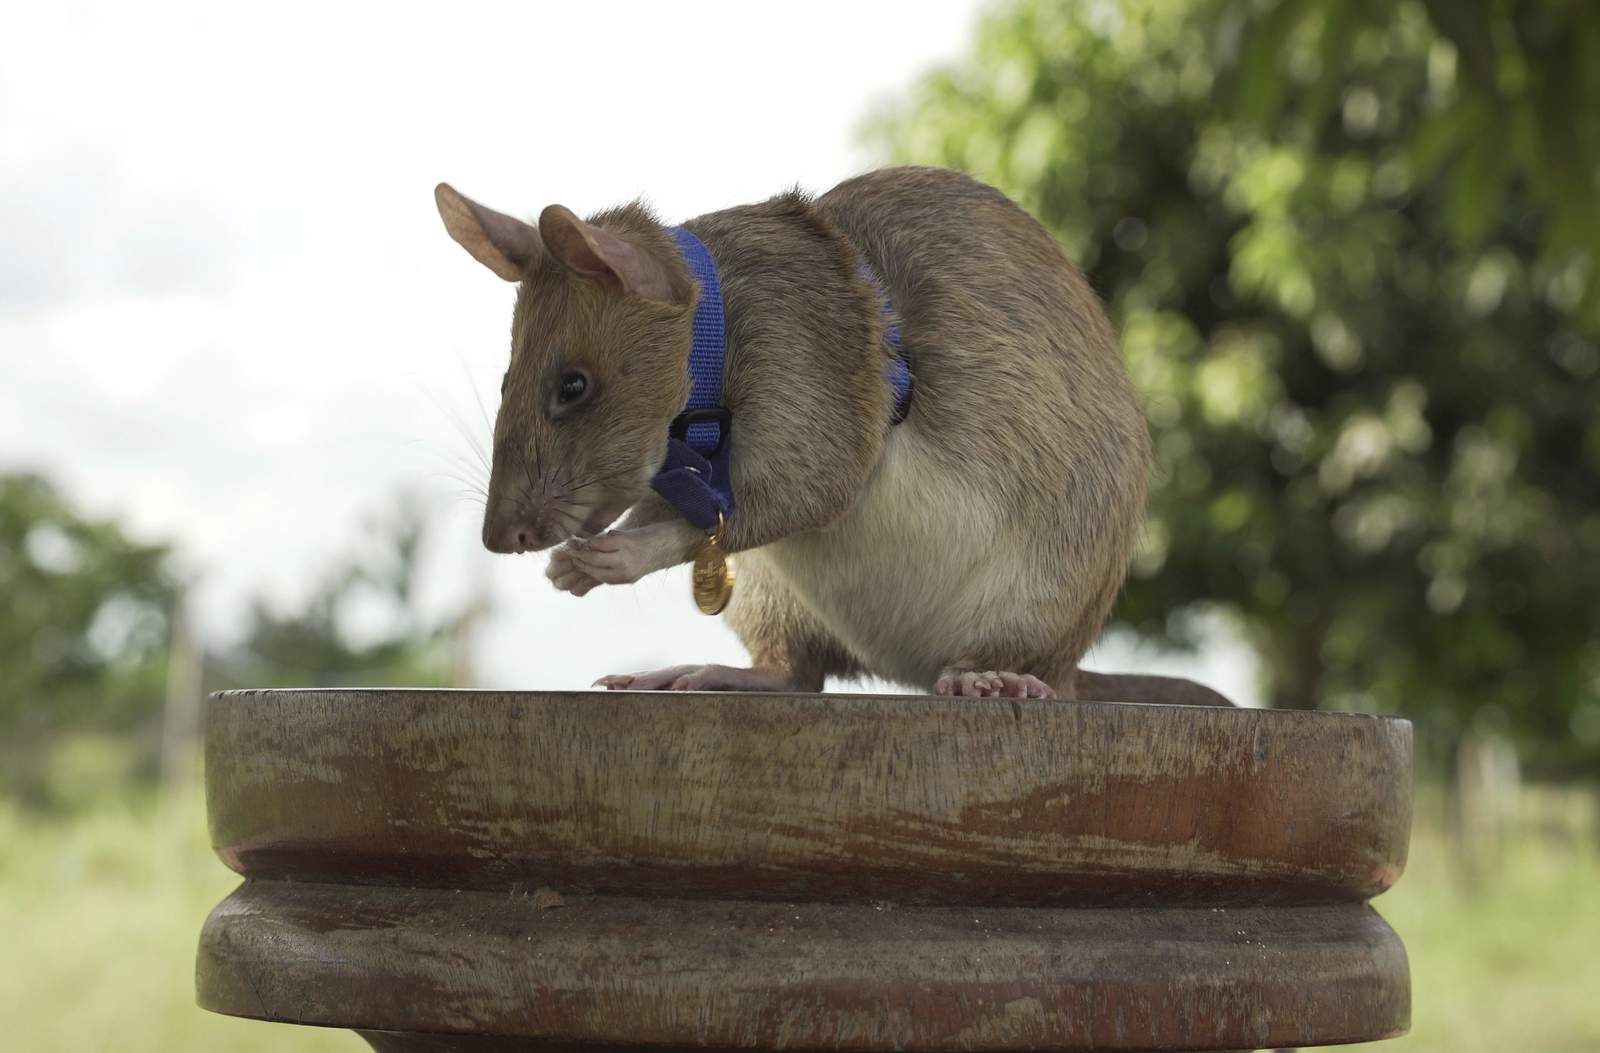 Giant rat wins animal hero award for sniffing out landmines